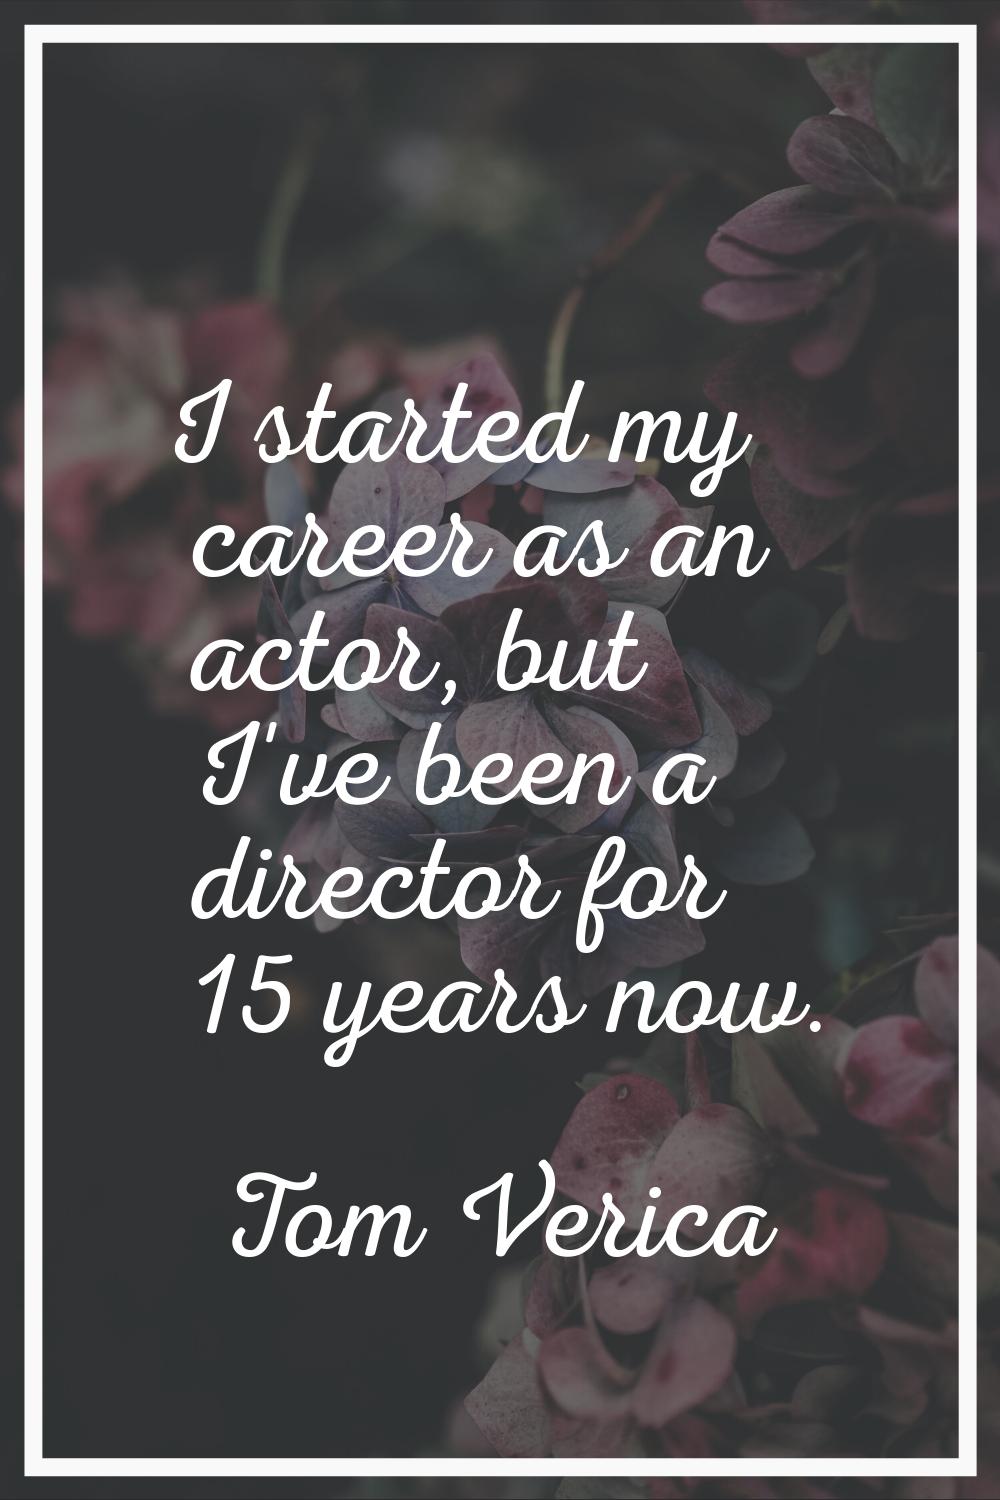 I started my career as an actor, but I've been a director for 15 years now.